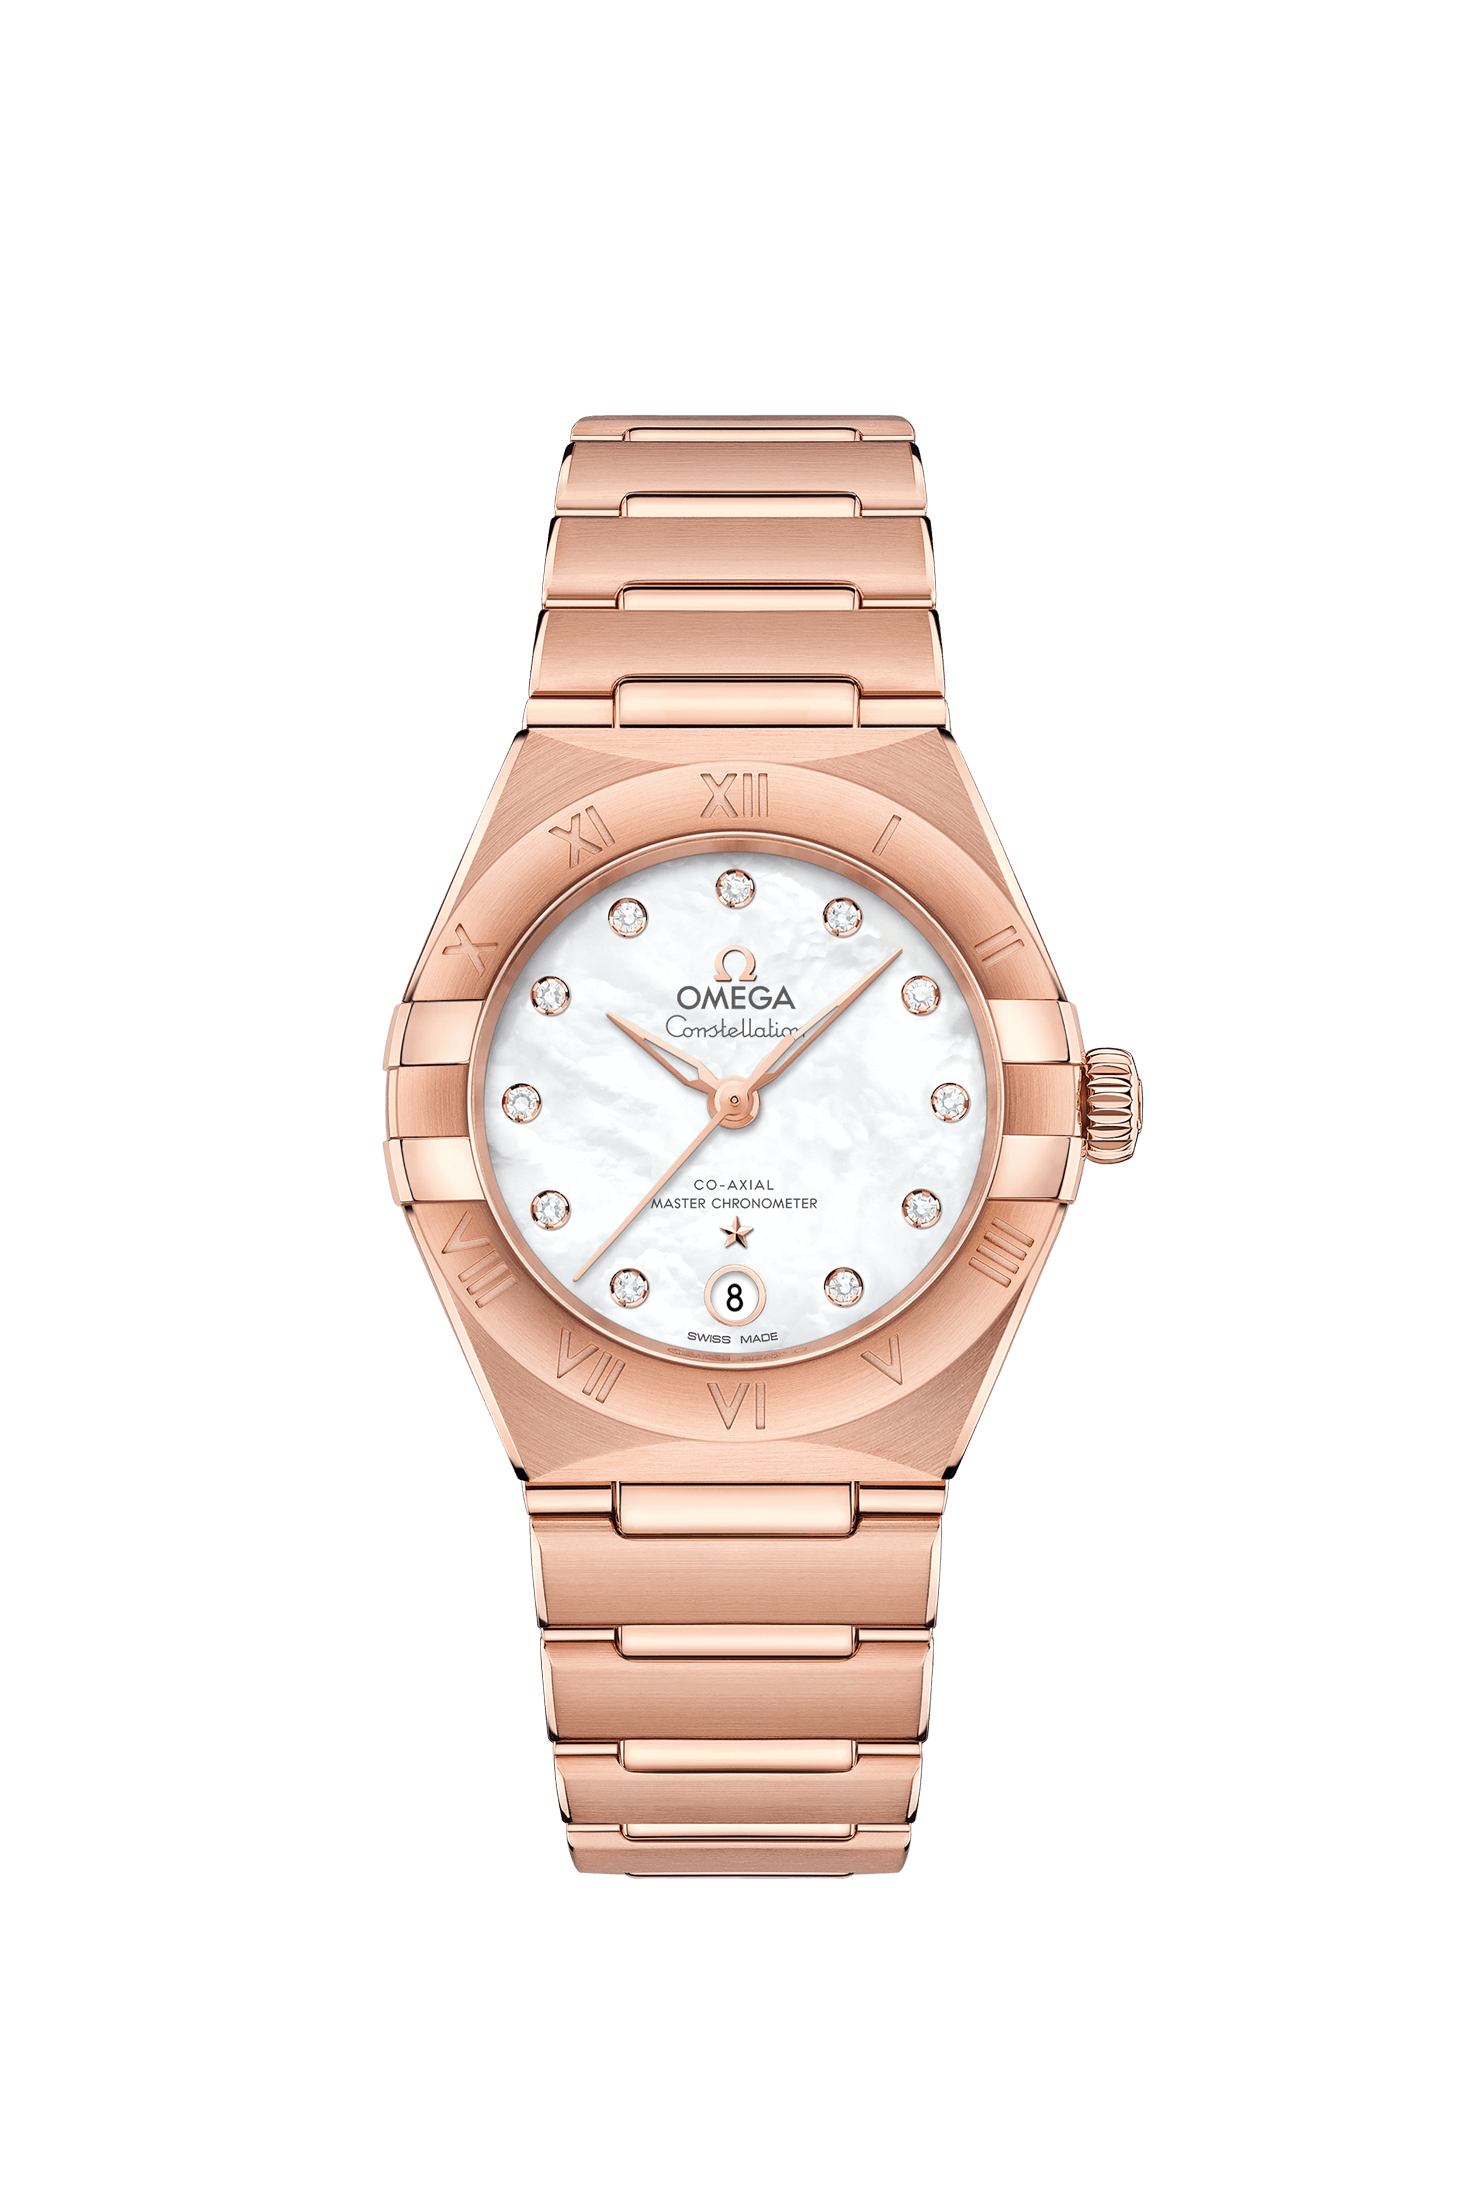 Ladies' watch  OMEGA, Constellation Co Axial Master Chronometer / 29mm, SKU: 131.50.29.20.55.001 | watchphilosophy.co.uk